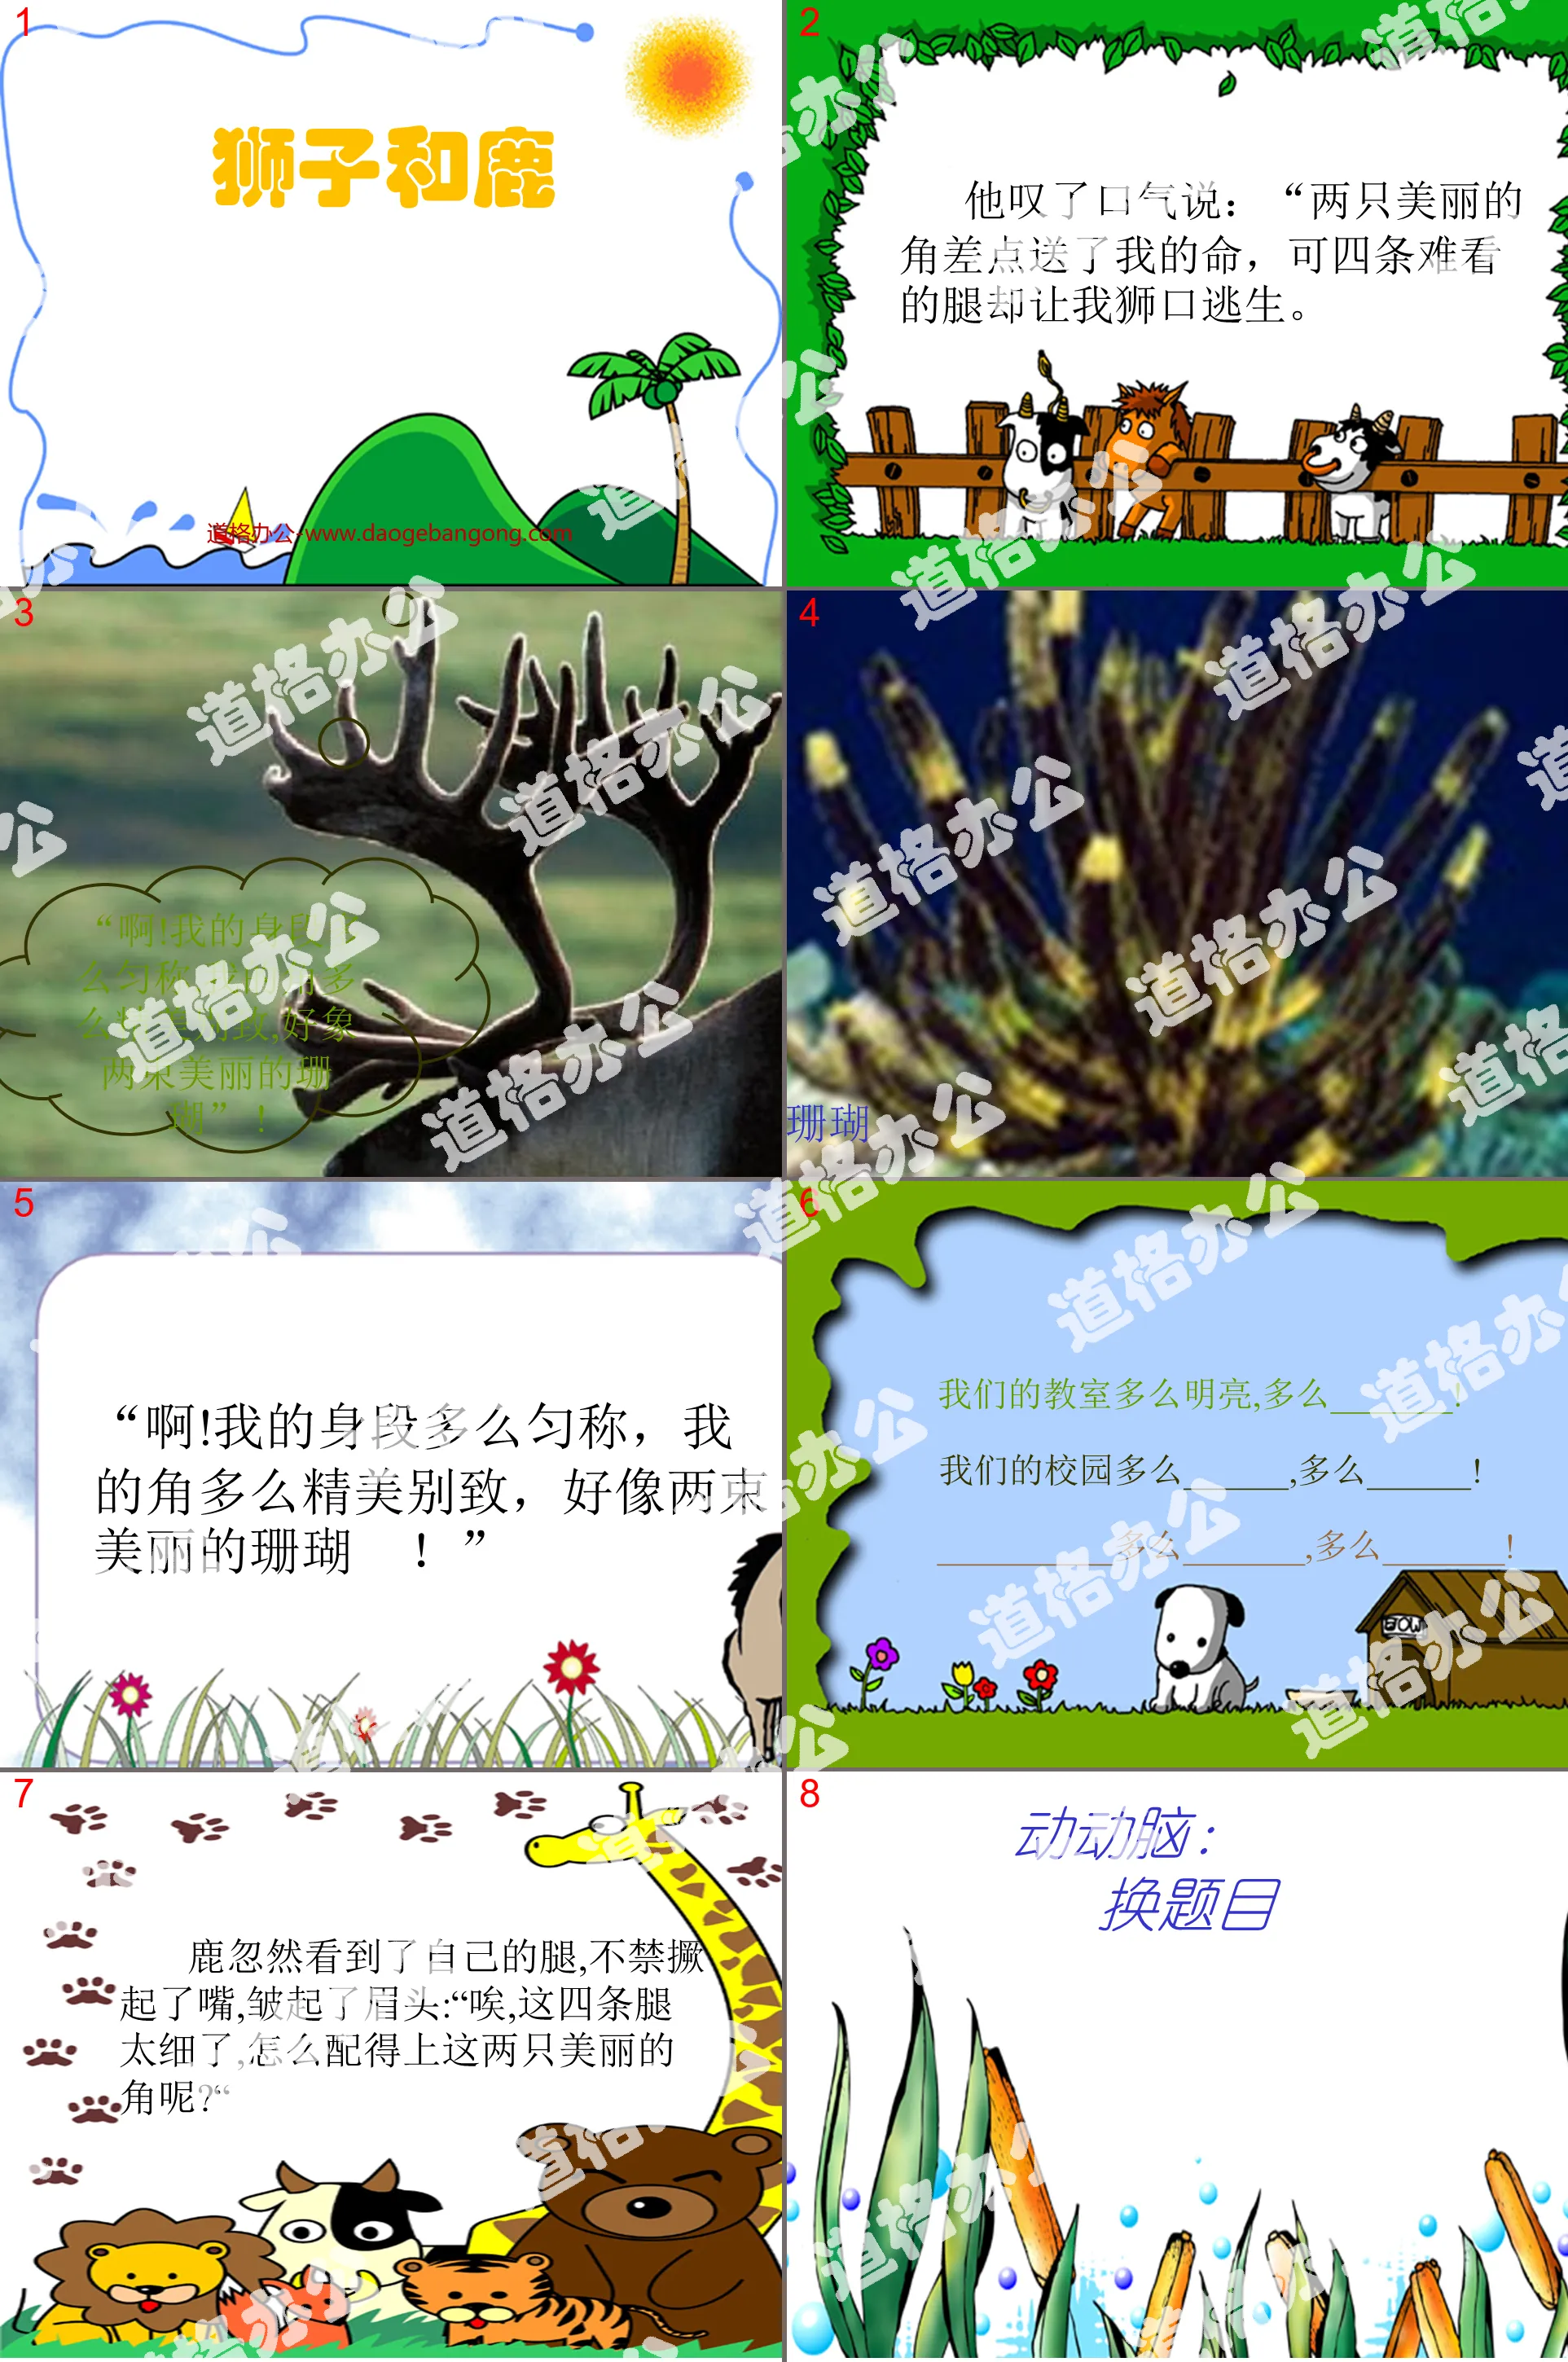 "Lion and Deer" PPT teaching courseware download